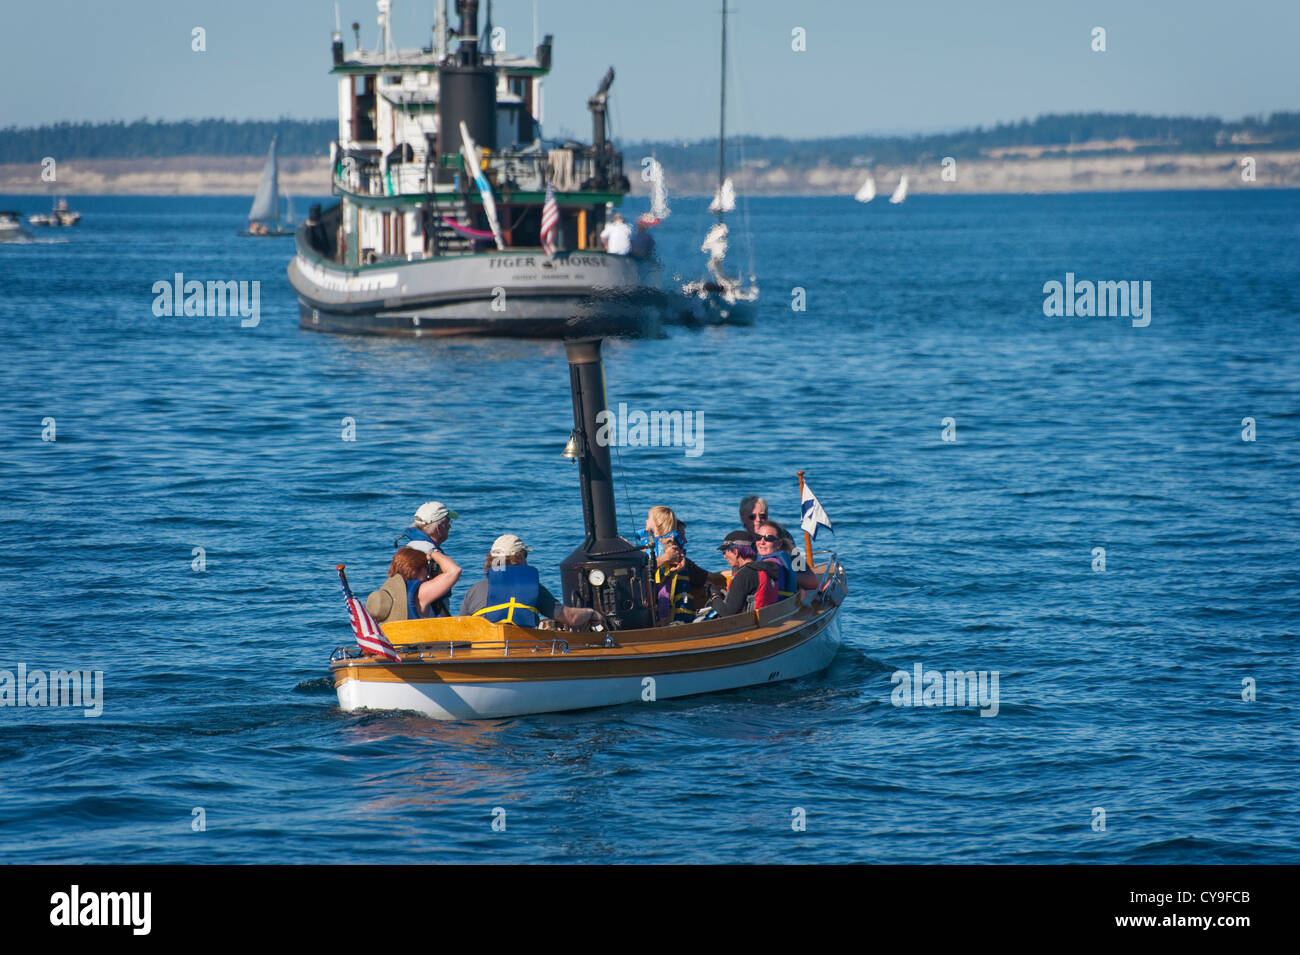 A stem powered launch takes visitors to Port Townsend out for a ride in the harbor during the summer Wooden Boat Festival. Stock Photo